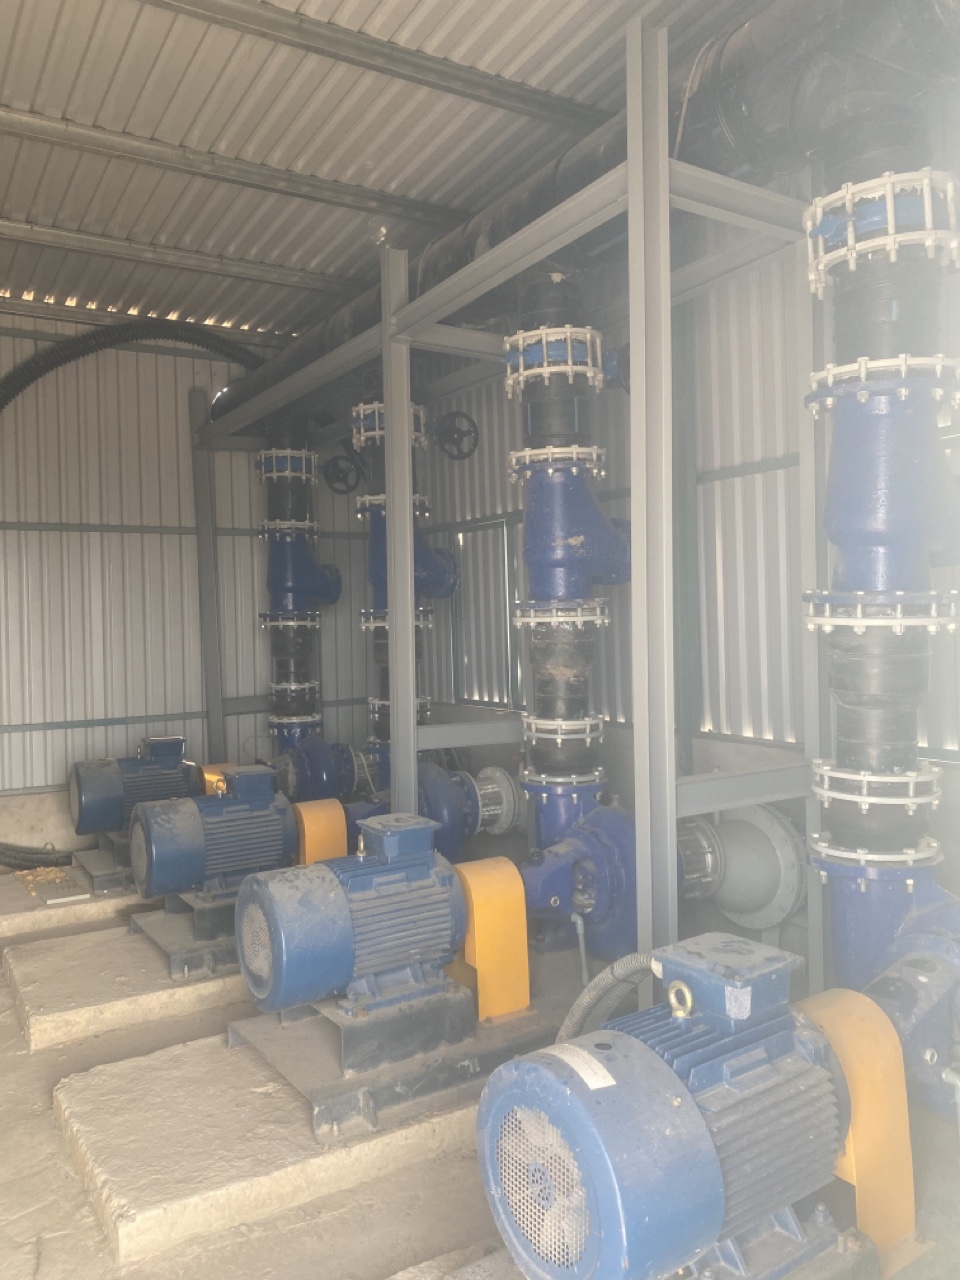 DESIGN AND CONSTRUCTION OF WATER SUPPLY PUMP STATION